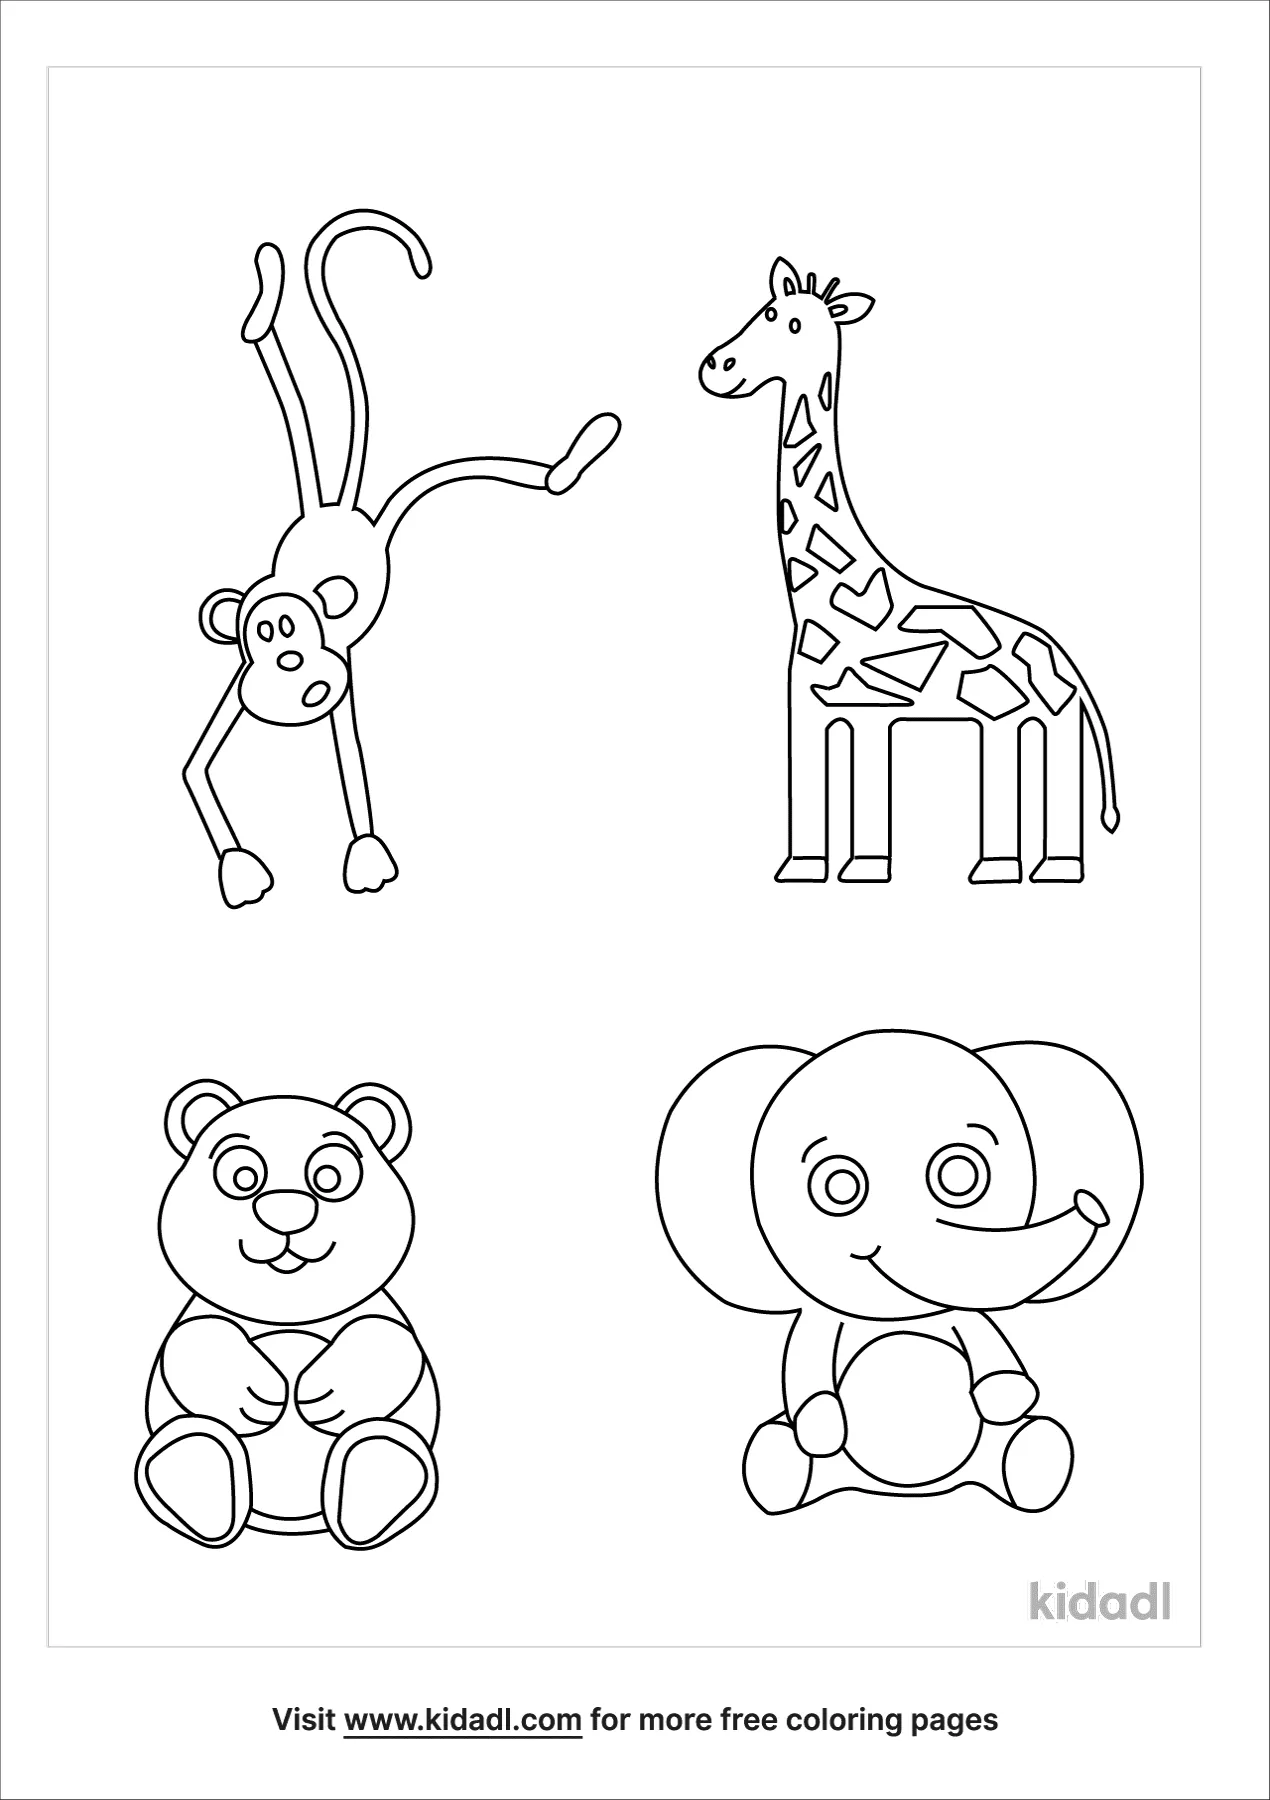 Free Zoo Animals Coloring Page | Coloring Page Printables | Kidadl